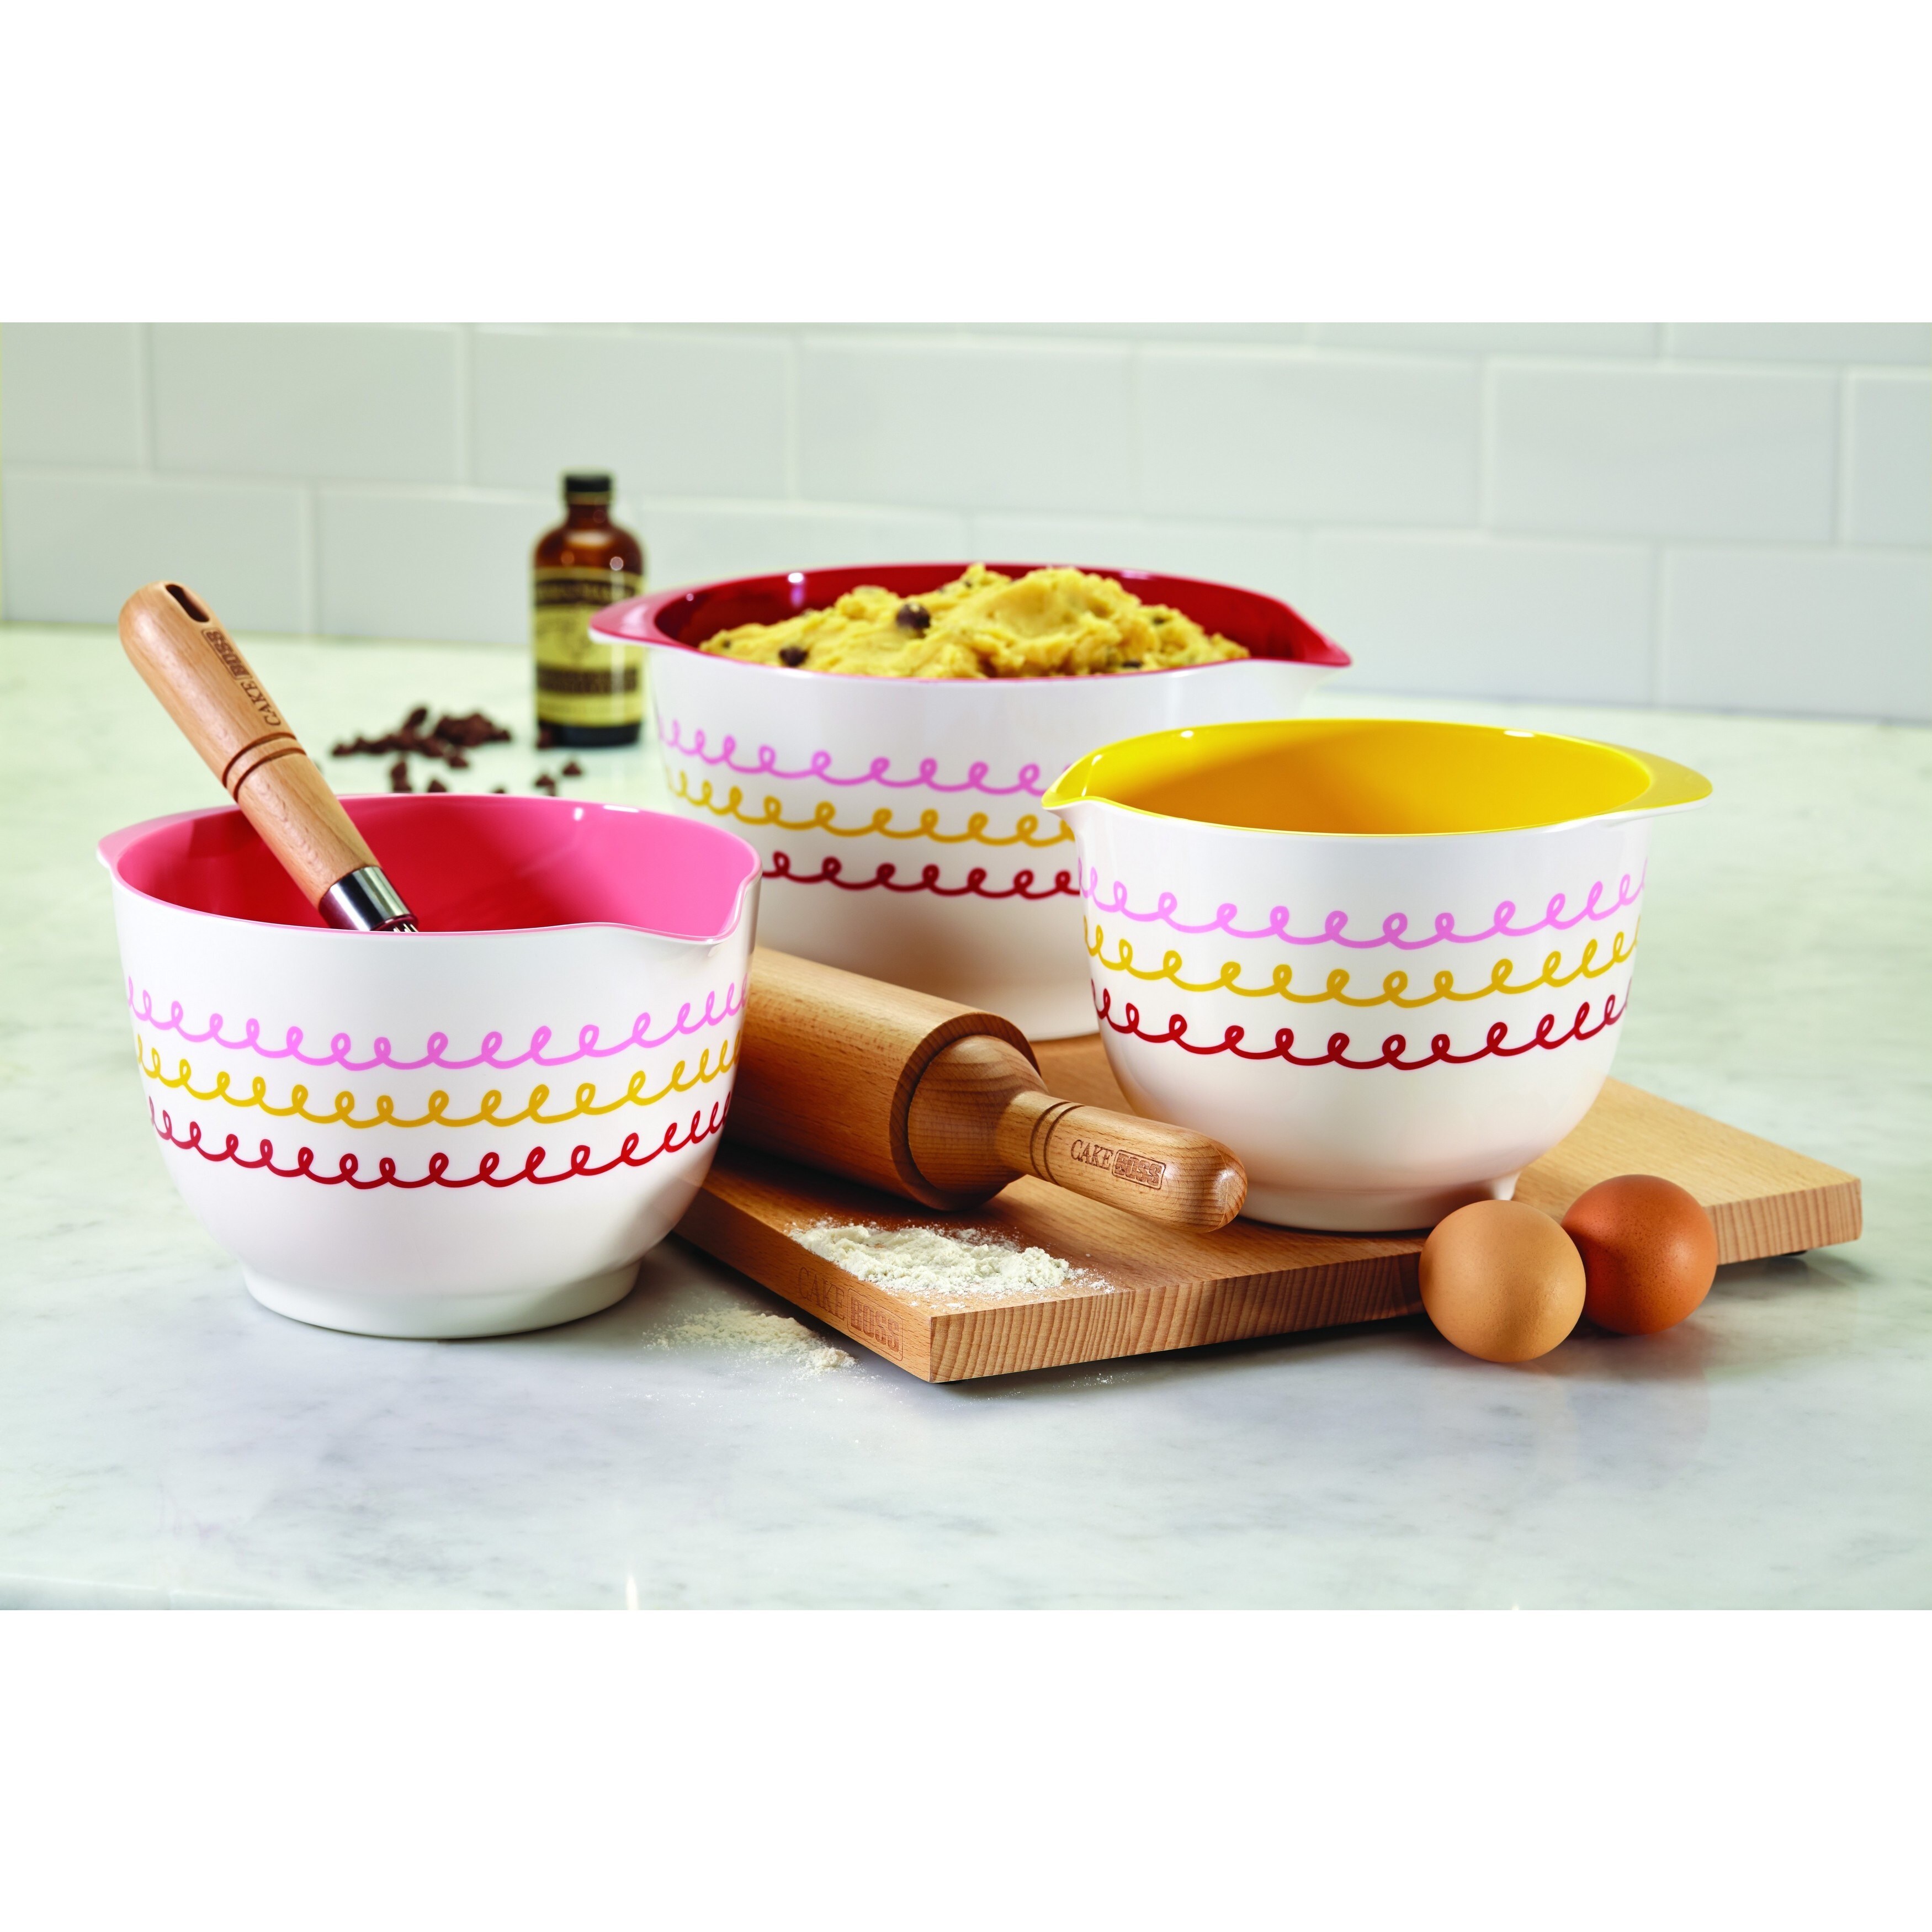 https://ak1.ostkcdn.com/images/products/9045434/Cake-Boss-Countertop-Accessories-3-Piece-Melamine-Mixing-Bowl-Set-Icing-Pattern-47de08c4-fd93-4fa5-9ffa-44eb7c688e0f.jpg